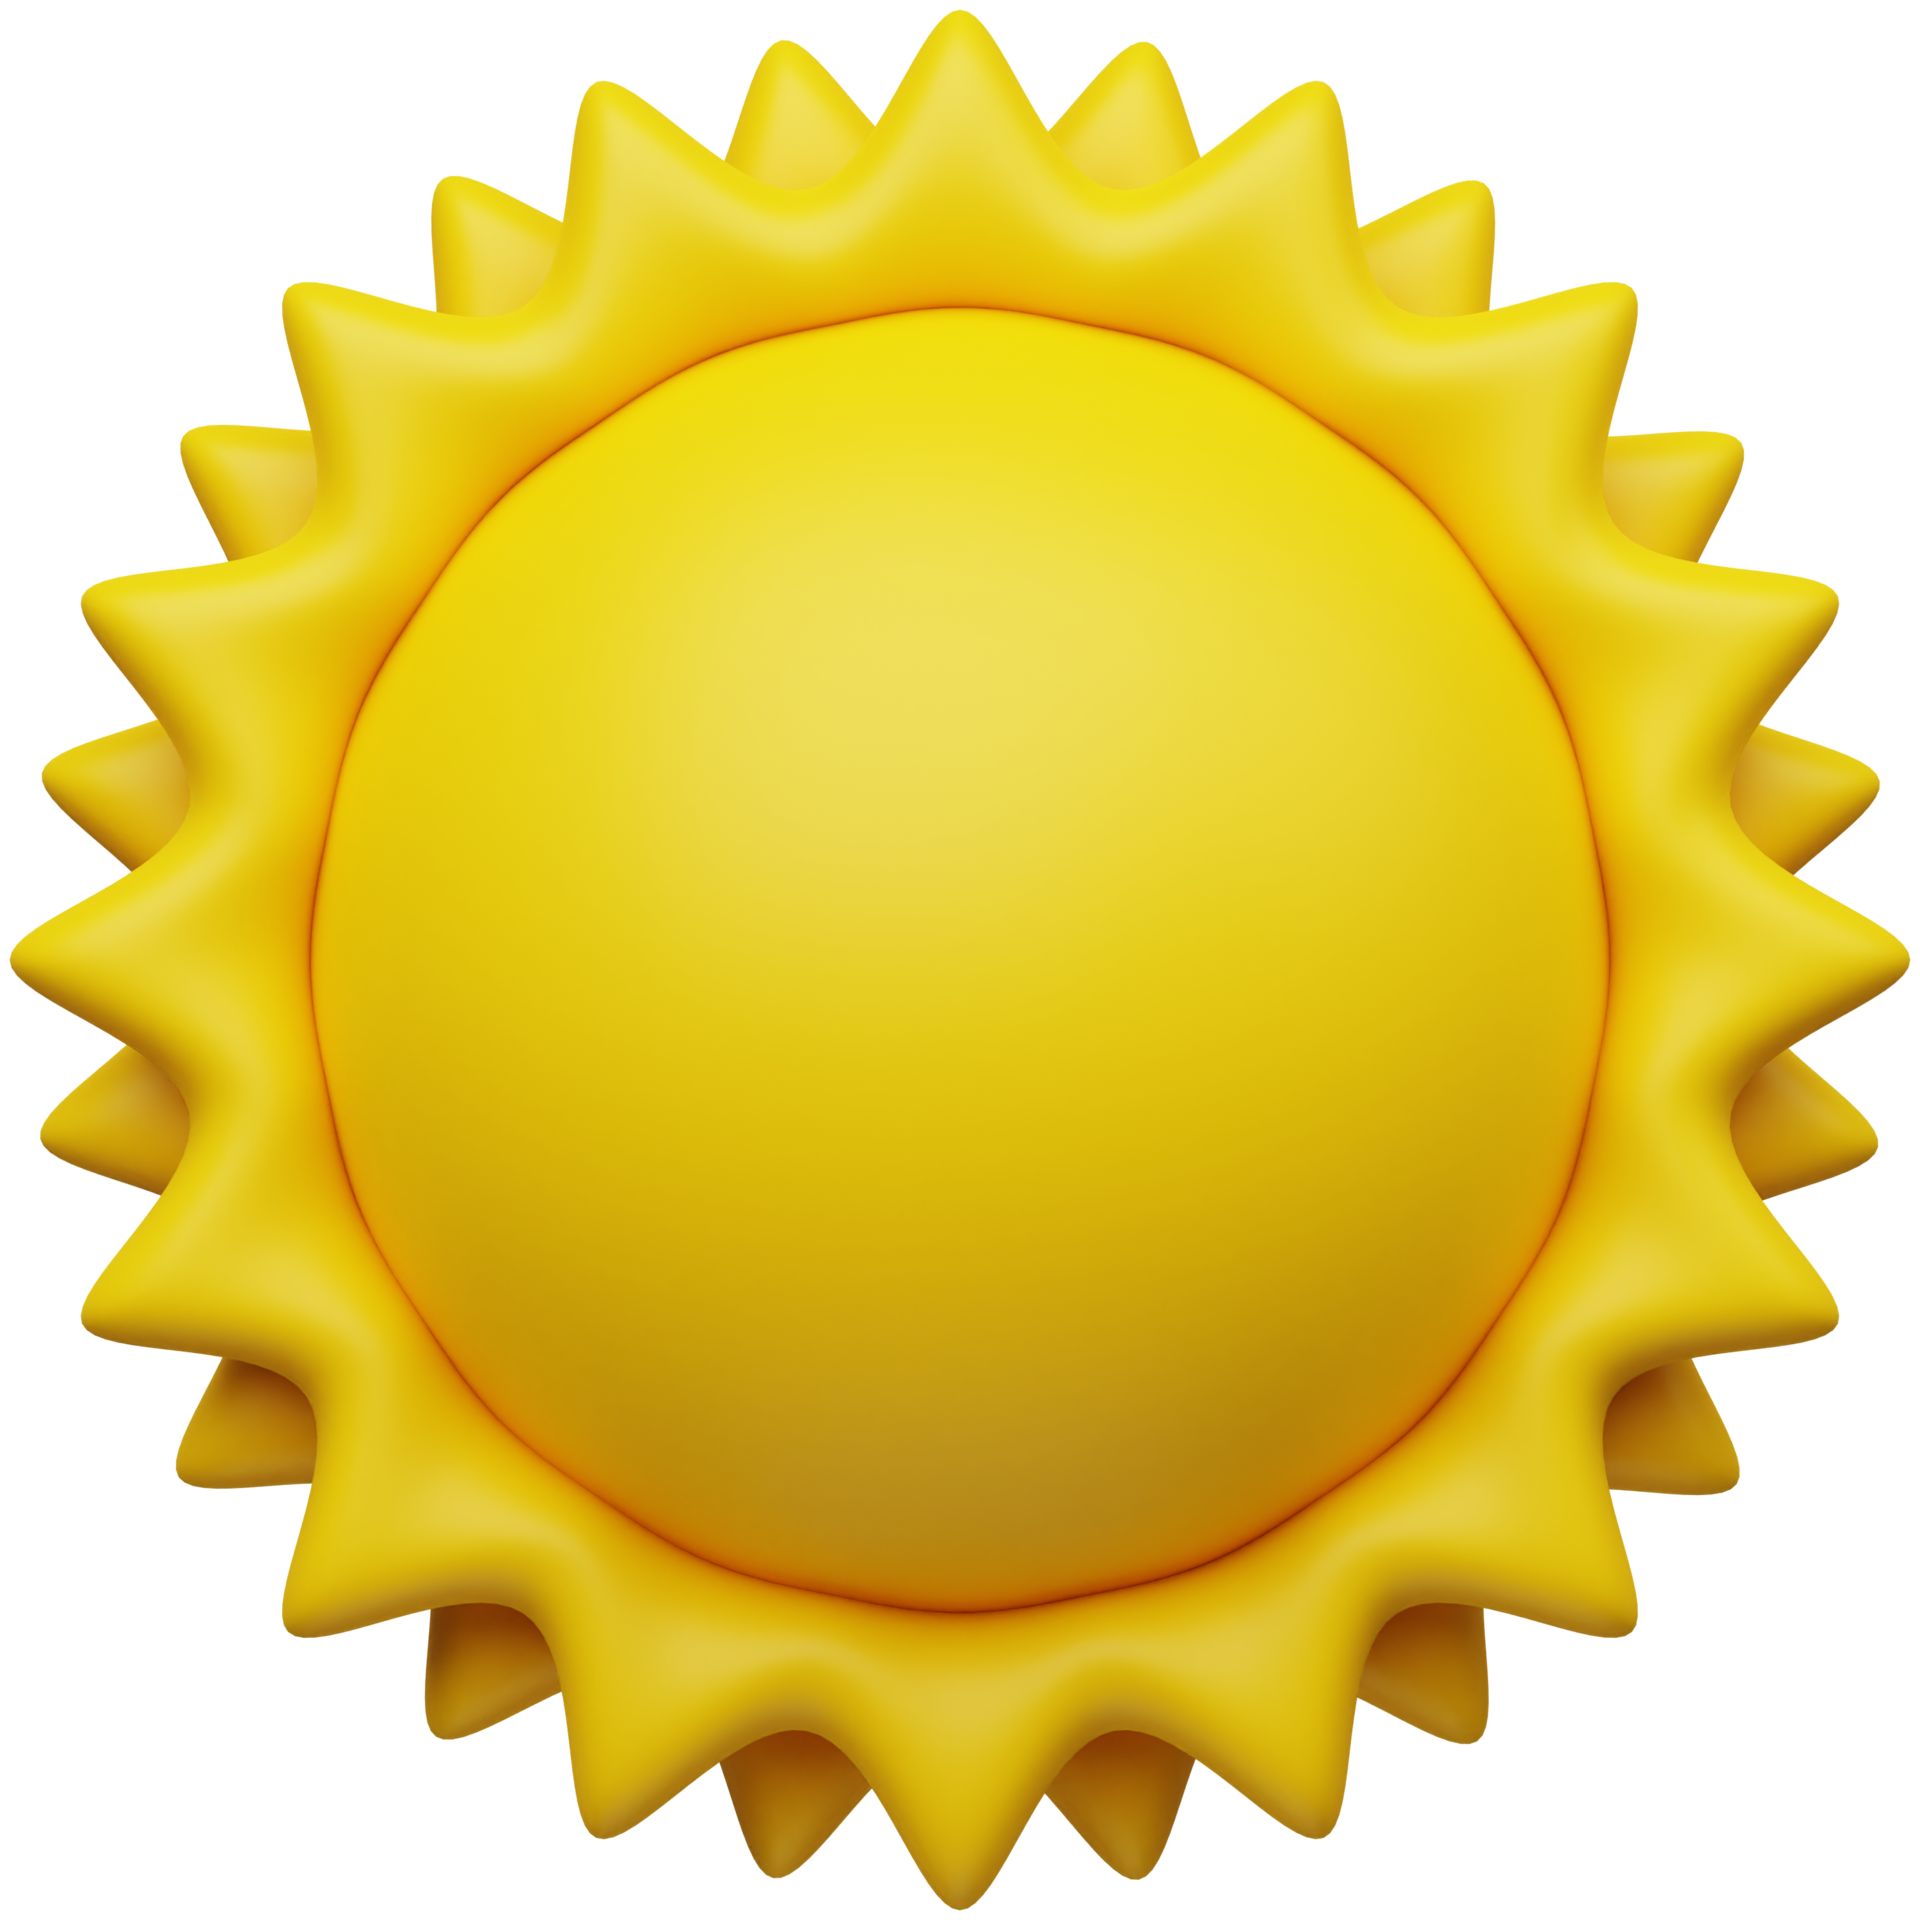 3d-sun-icon-illustration-png.png